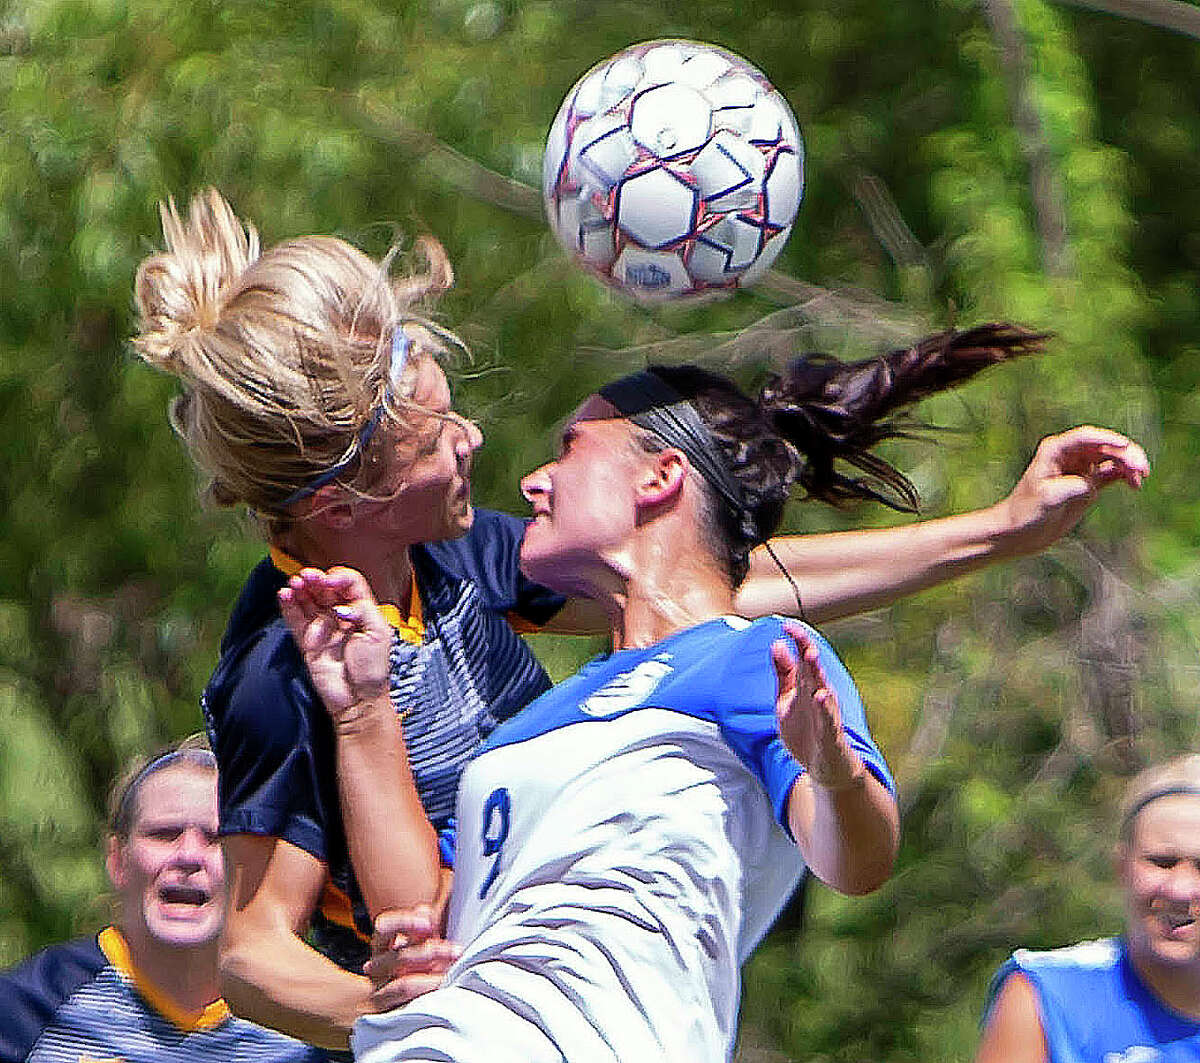 LCCC's Paige Bauer (9) battles for a header with a Johnson County player during Sunday action at LCCC. The Trailblazers were scheduled to play host to Illinois Central College Thursday, but the game was postponed because of field conditions following Wednesday night's rain.  